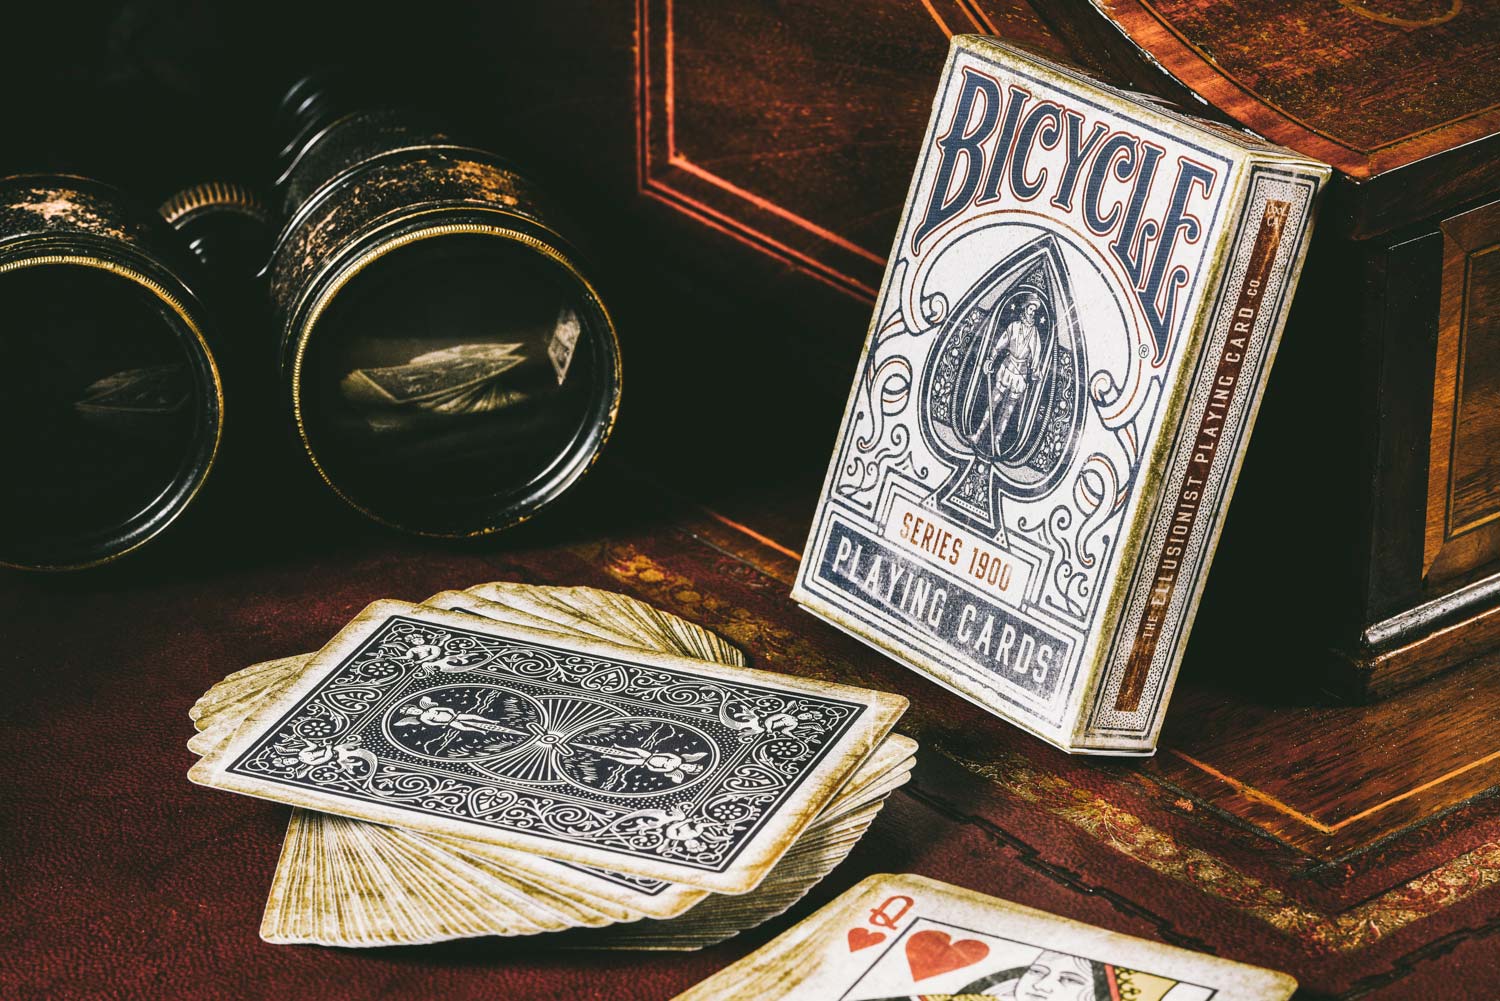 Bicycle 1900 - Blue by USPCC Crushed | Ellusionist